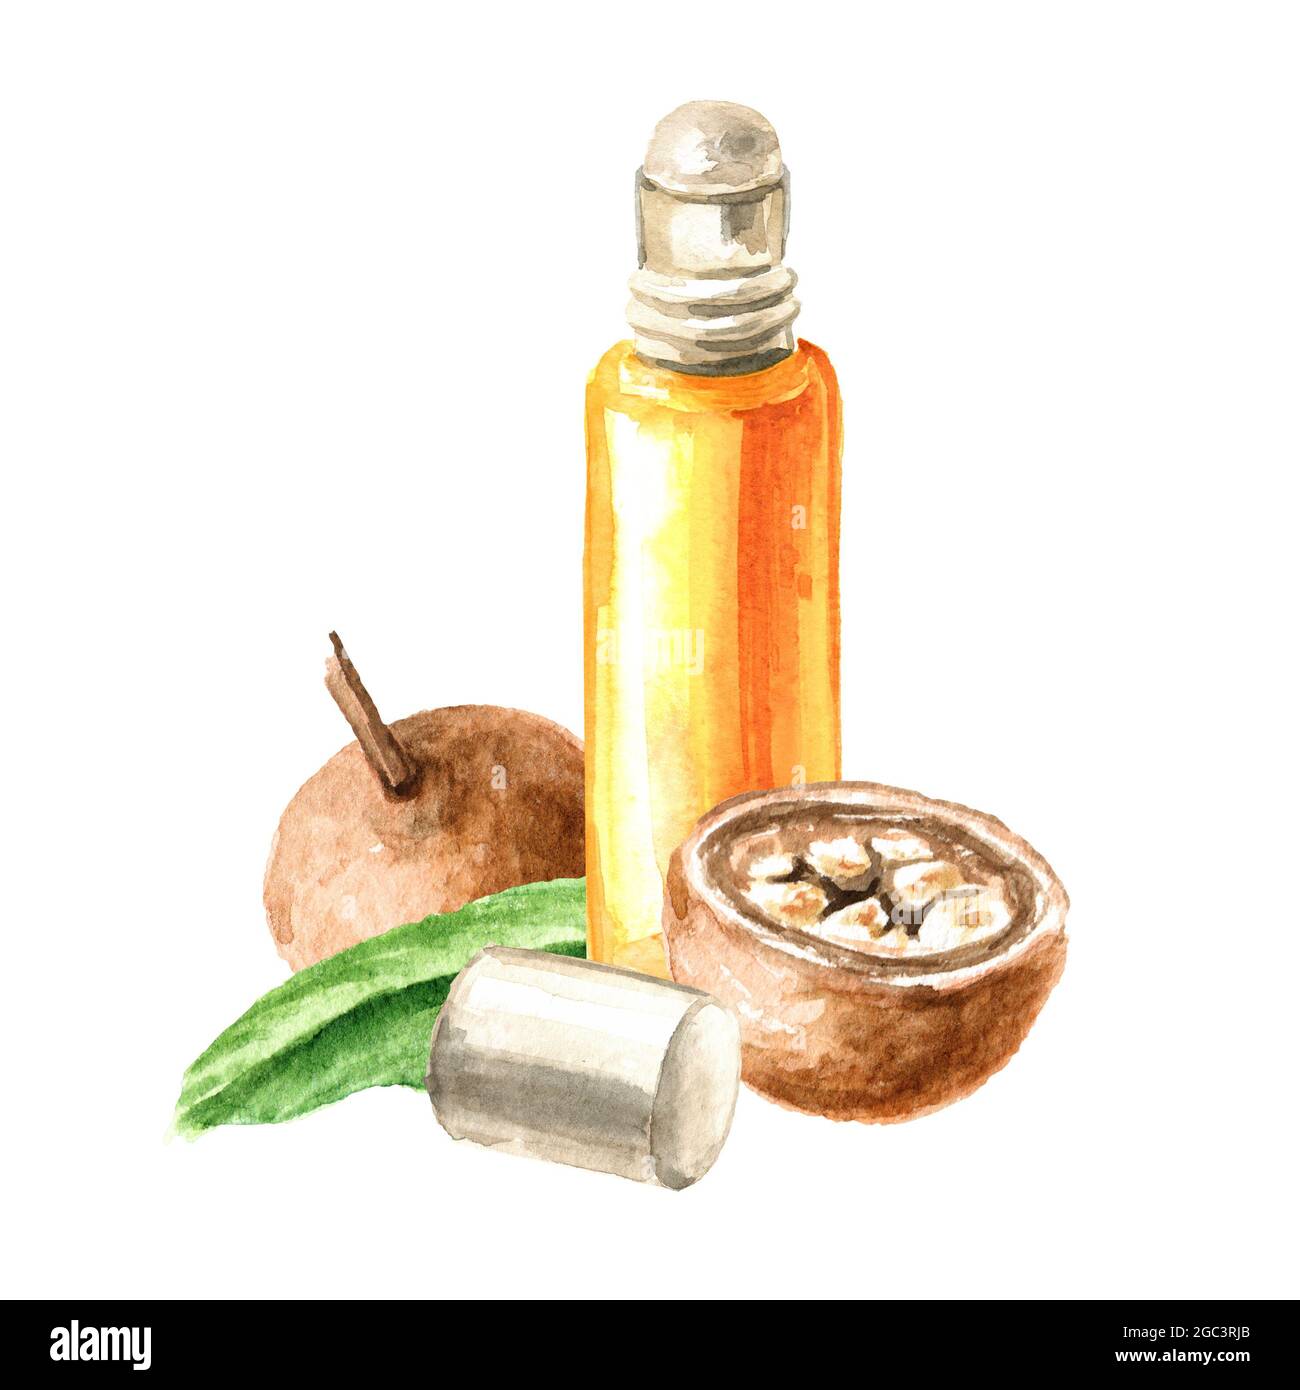 Medical Fruit Hydnocarpus anthelminthicus or Chaulmoogra and bottle of essential oil, Watercolor hand drawn illustration, isolated on white background Stock Photo